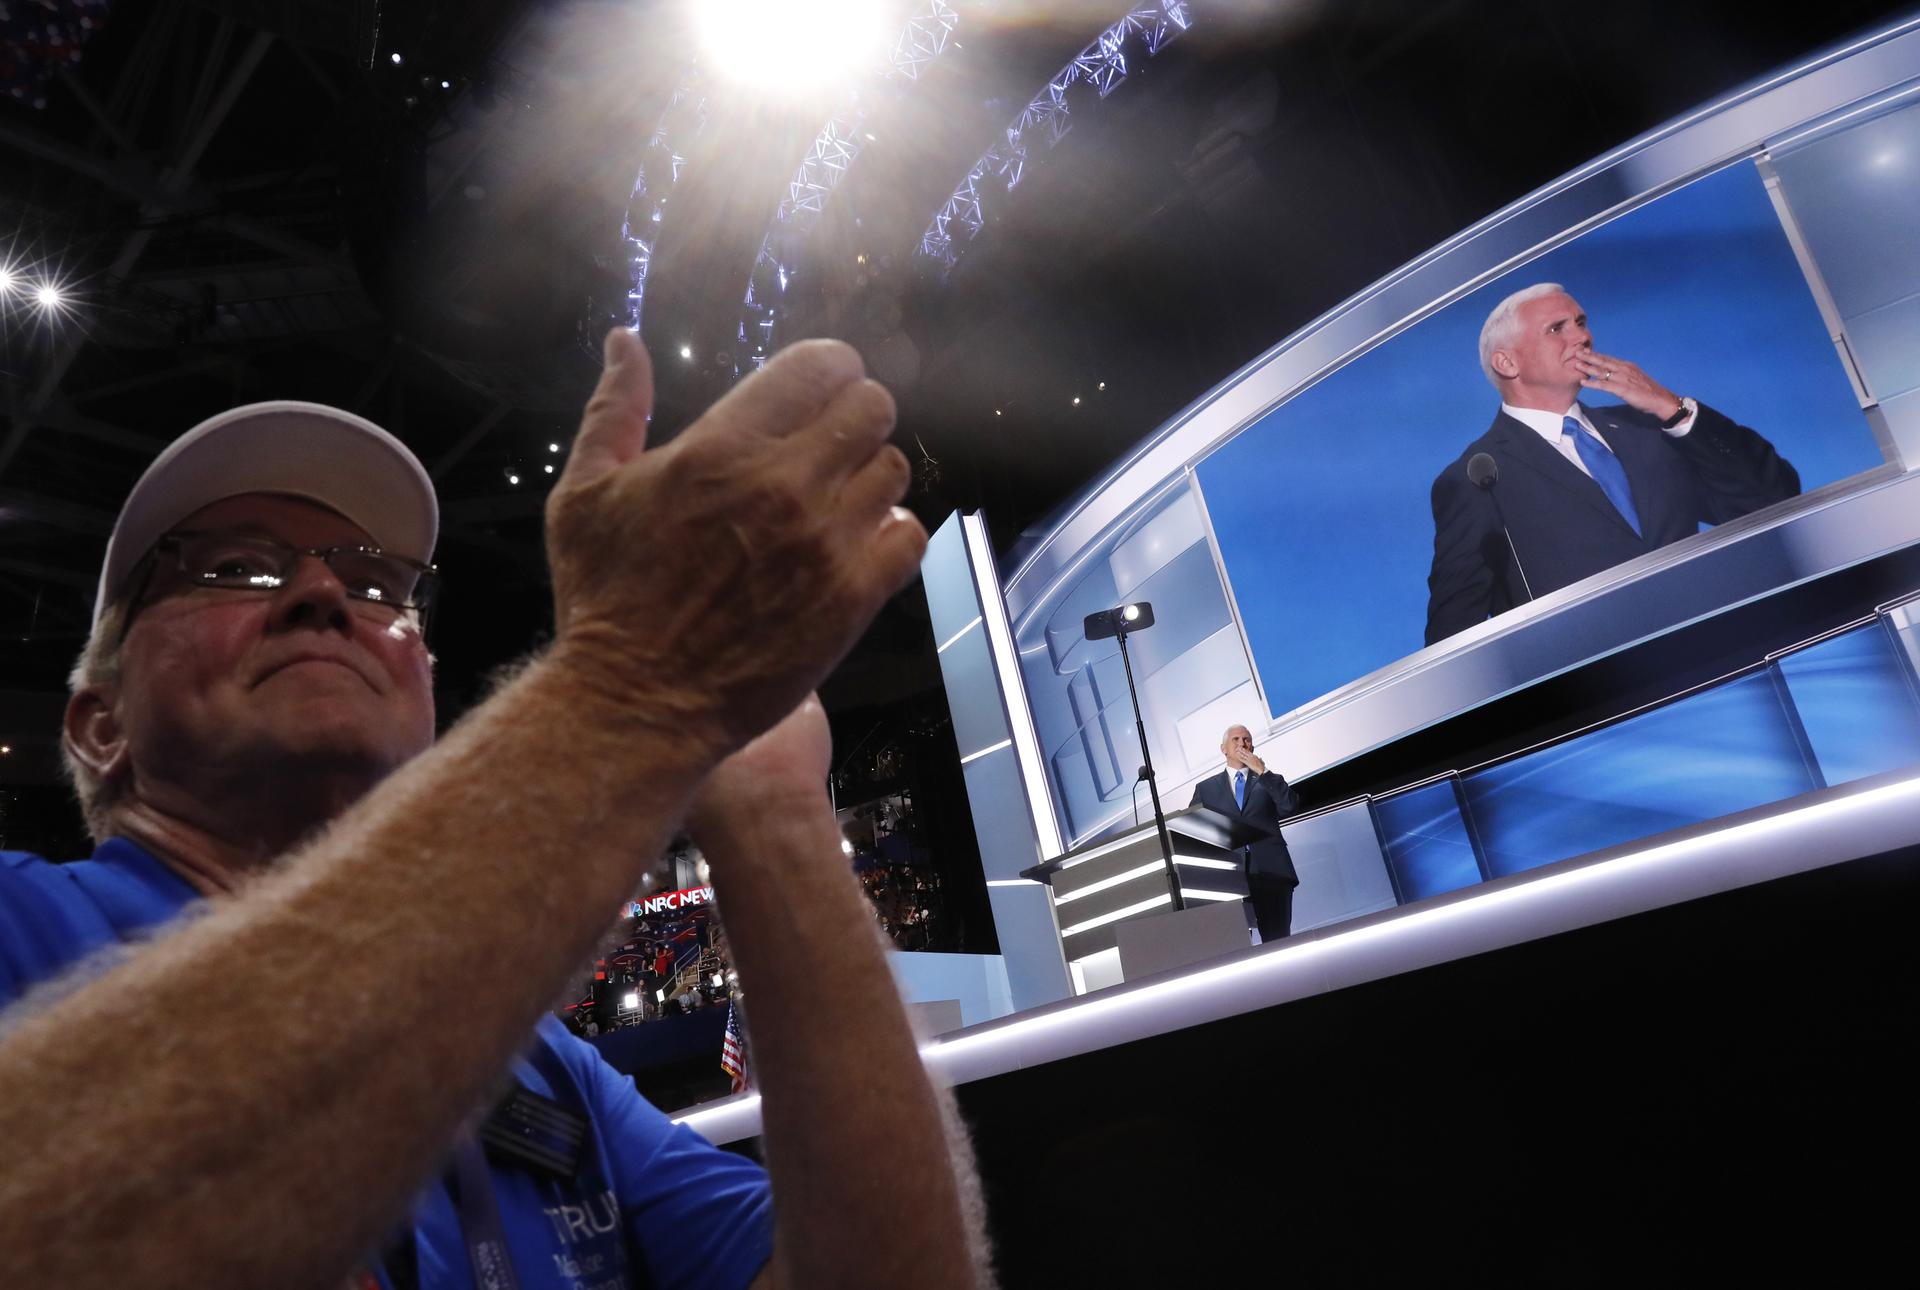 A delegate applauds as Republican vice presidential nominee Indiana Governor Mike Pence speaks during the third night at the Republican National Convention in Cleveland, Ohio, U.S. July 20, 2016.